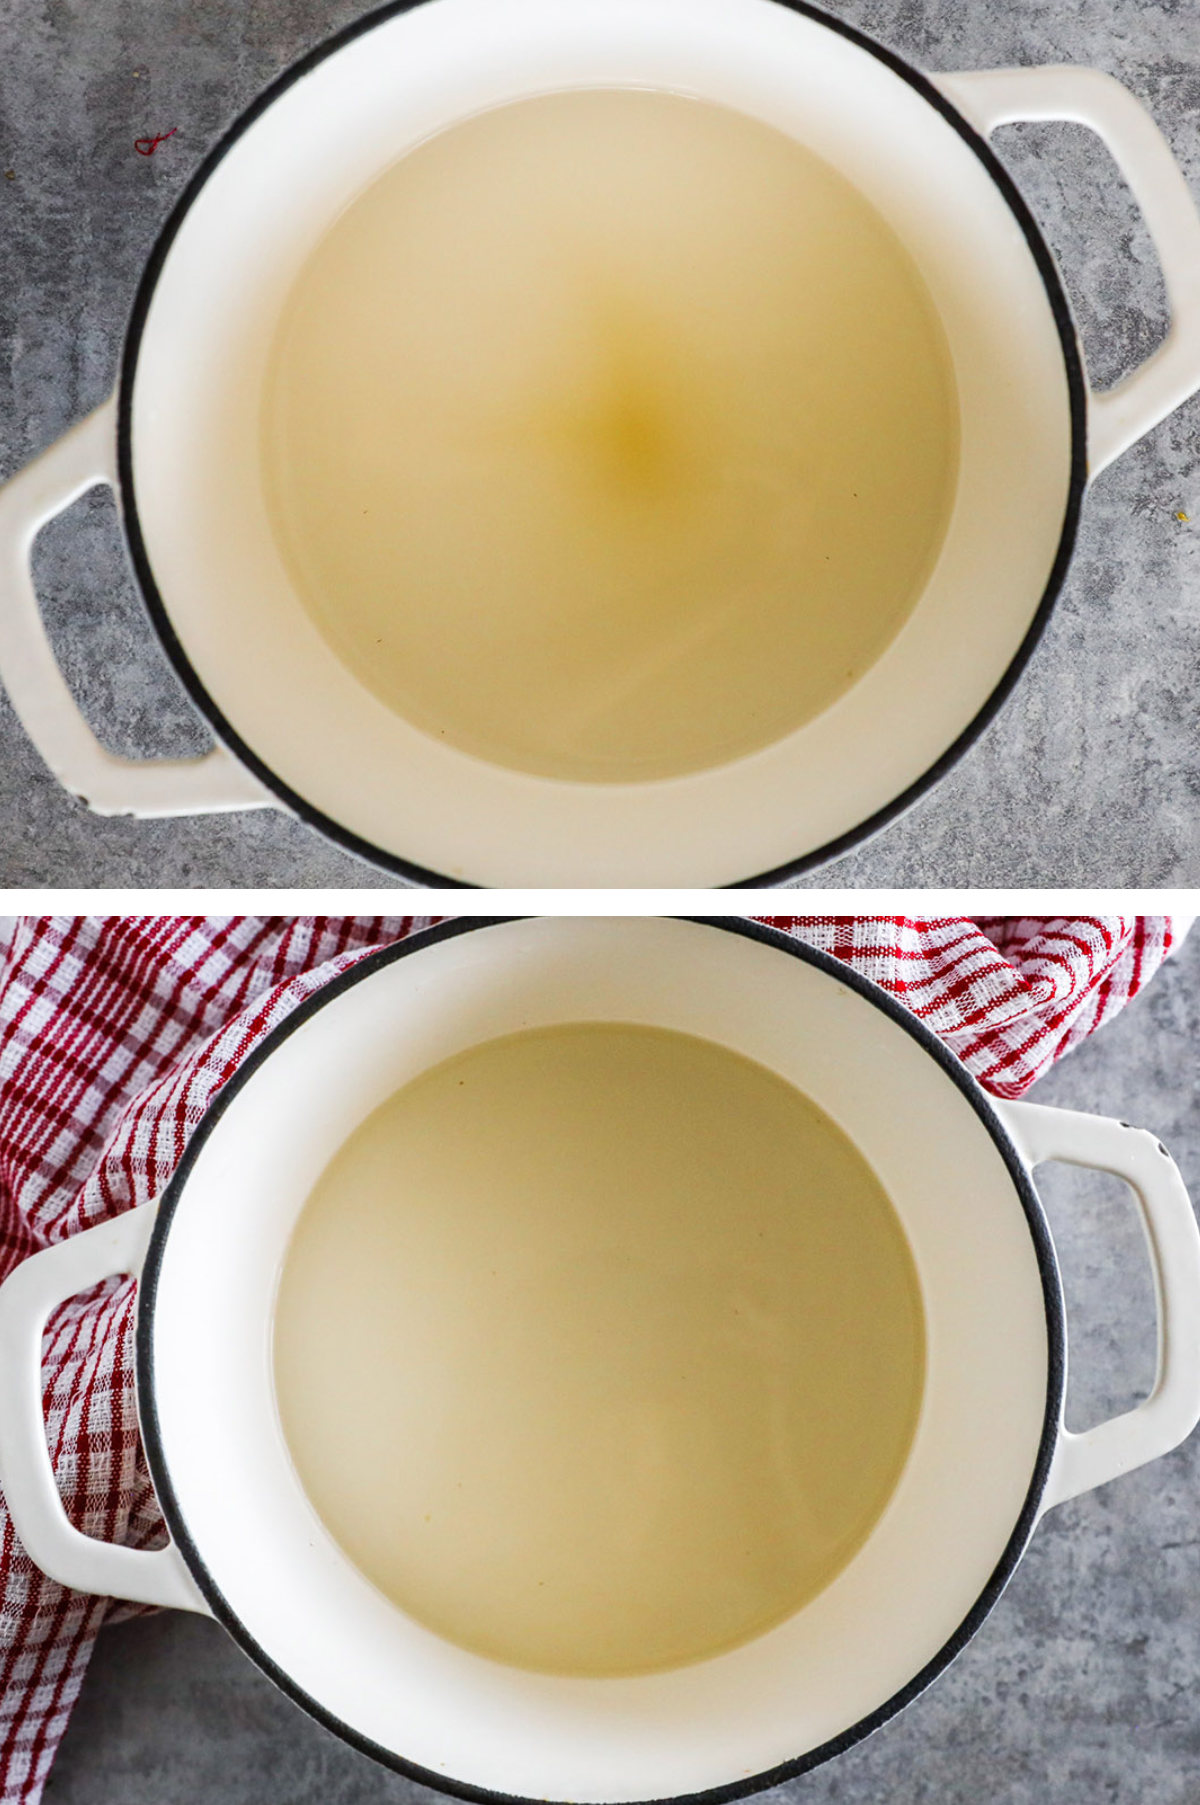 Two overhead images in one: 1. White pot with water and sugar. 2. White pot with sugar dissolved. 